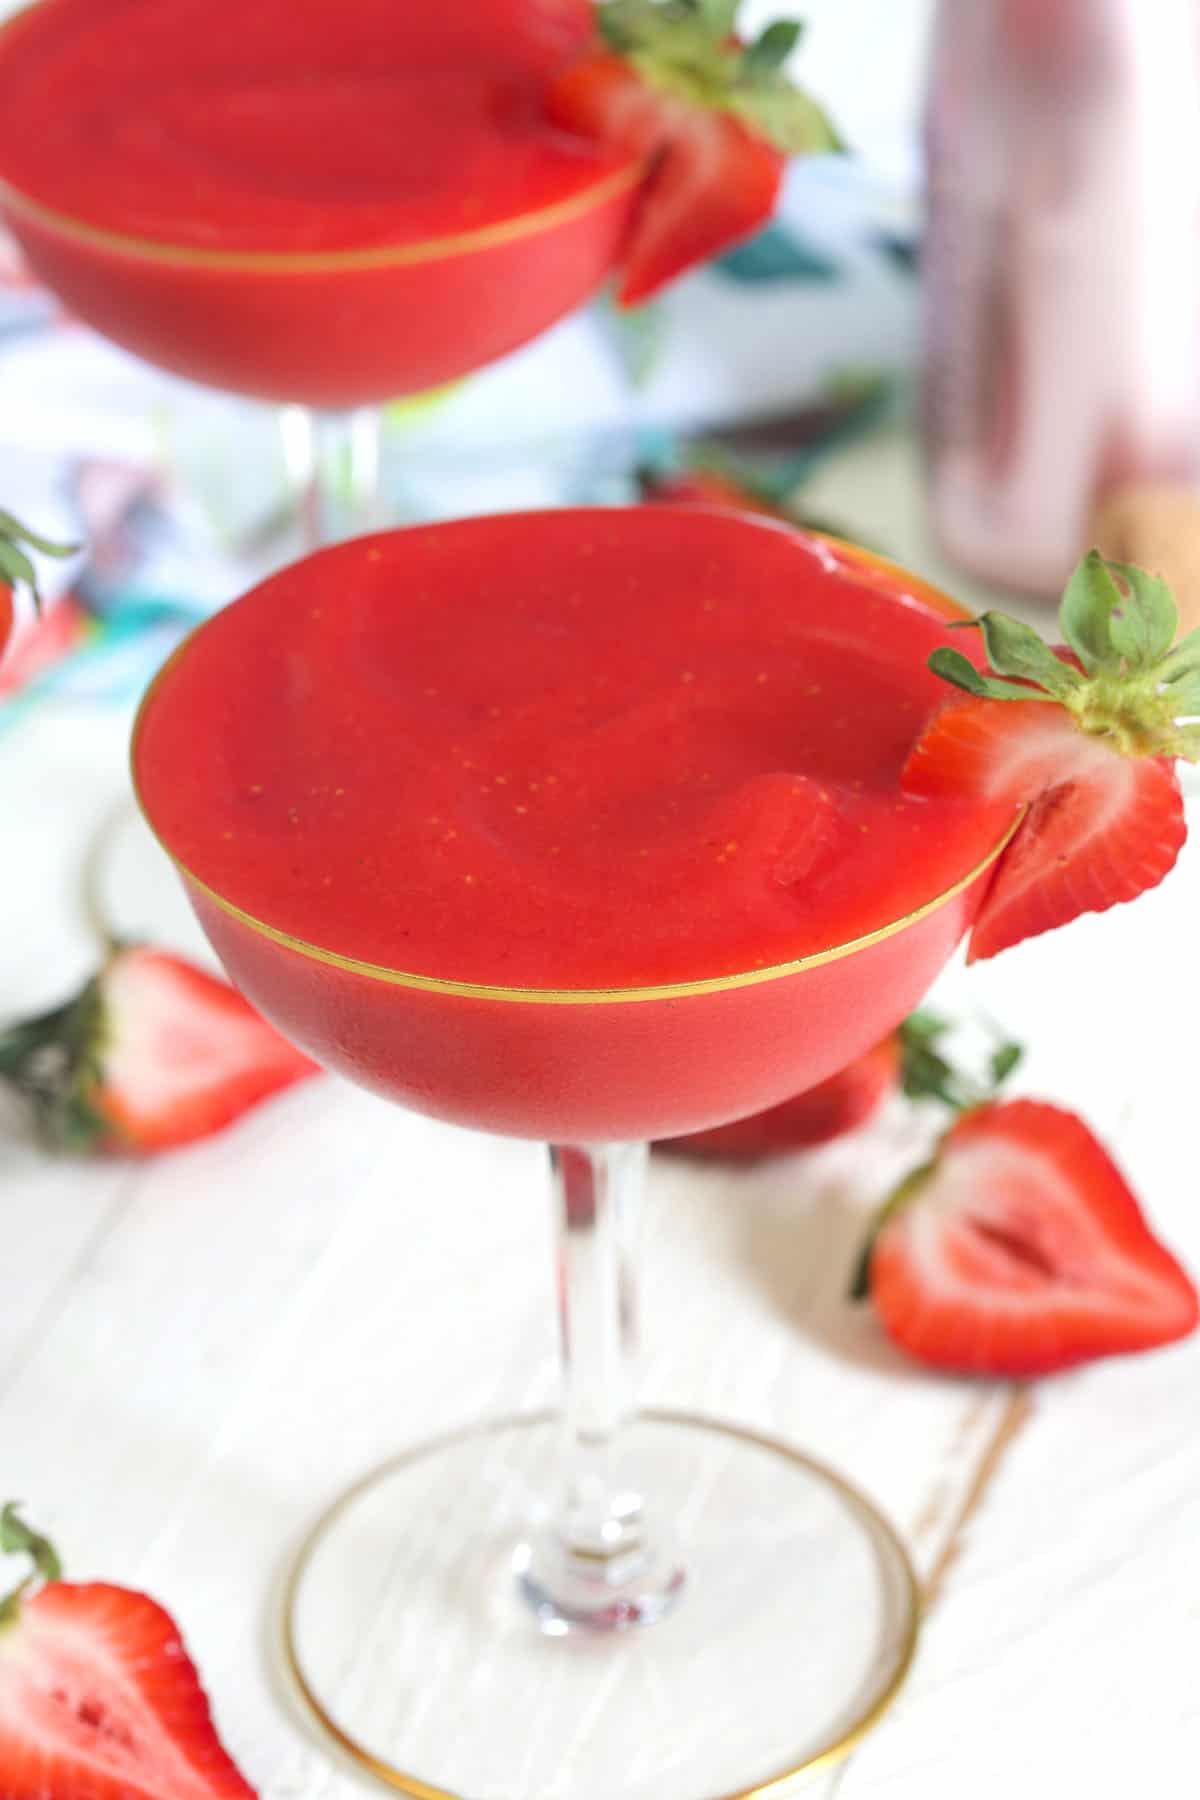 A glass of frose is garnished with a strawberry slice.